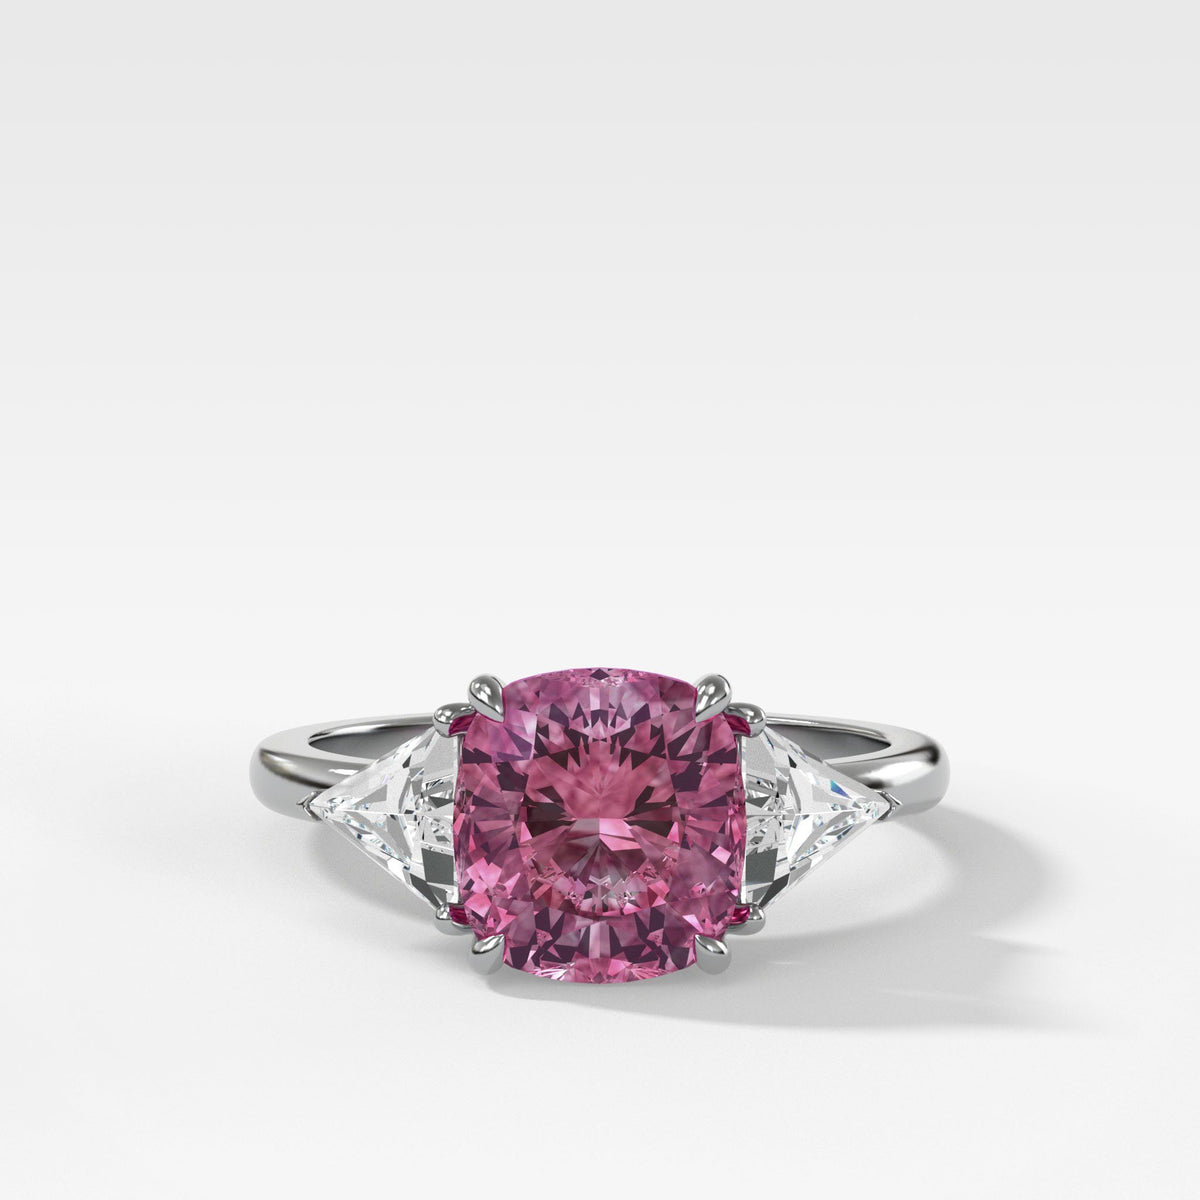 Vintage 2.35ct Pink Sapphire Three Stone Ring with Trillion Diamond Sides by Good Stone in White Gold